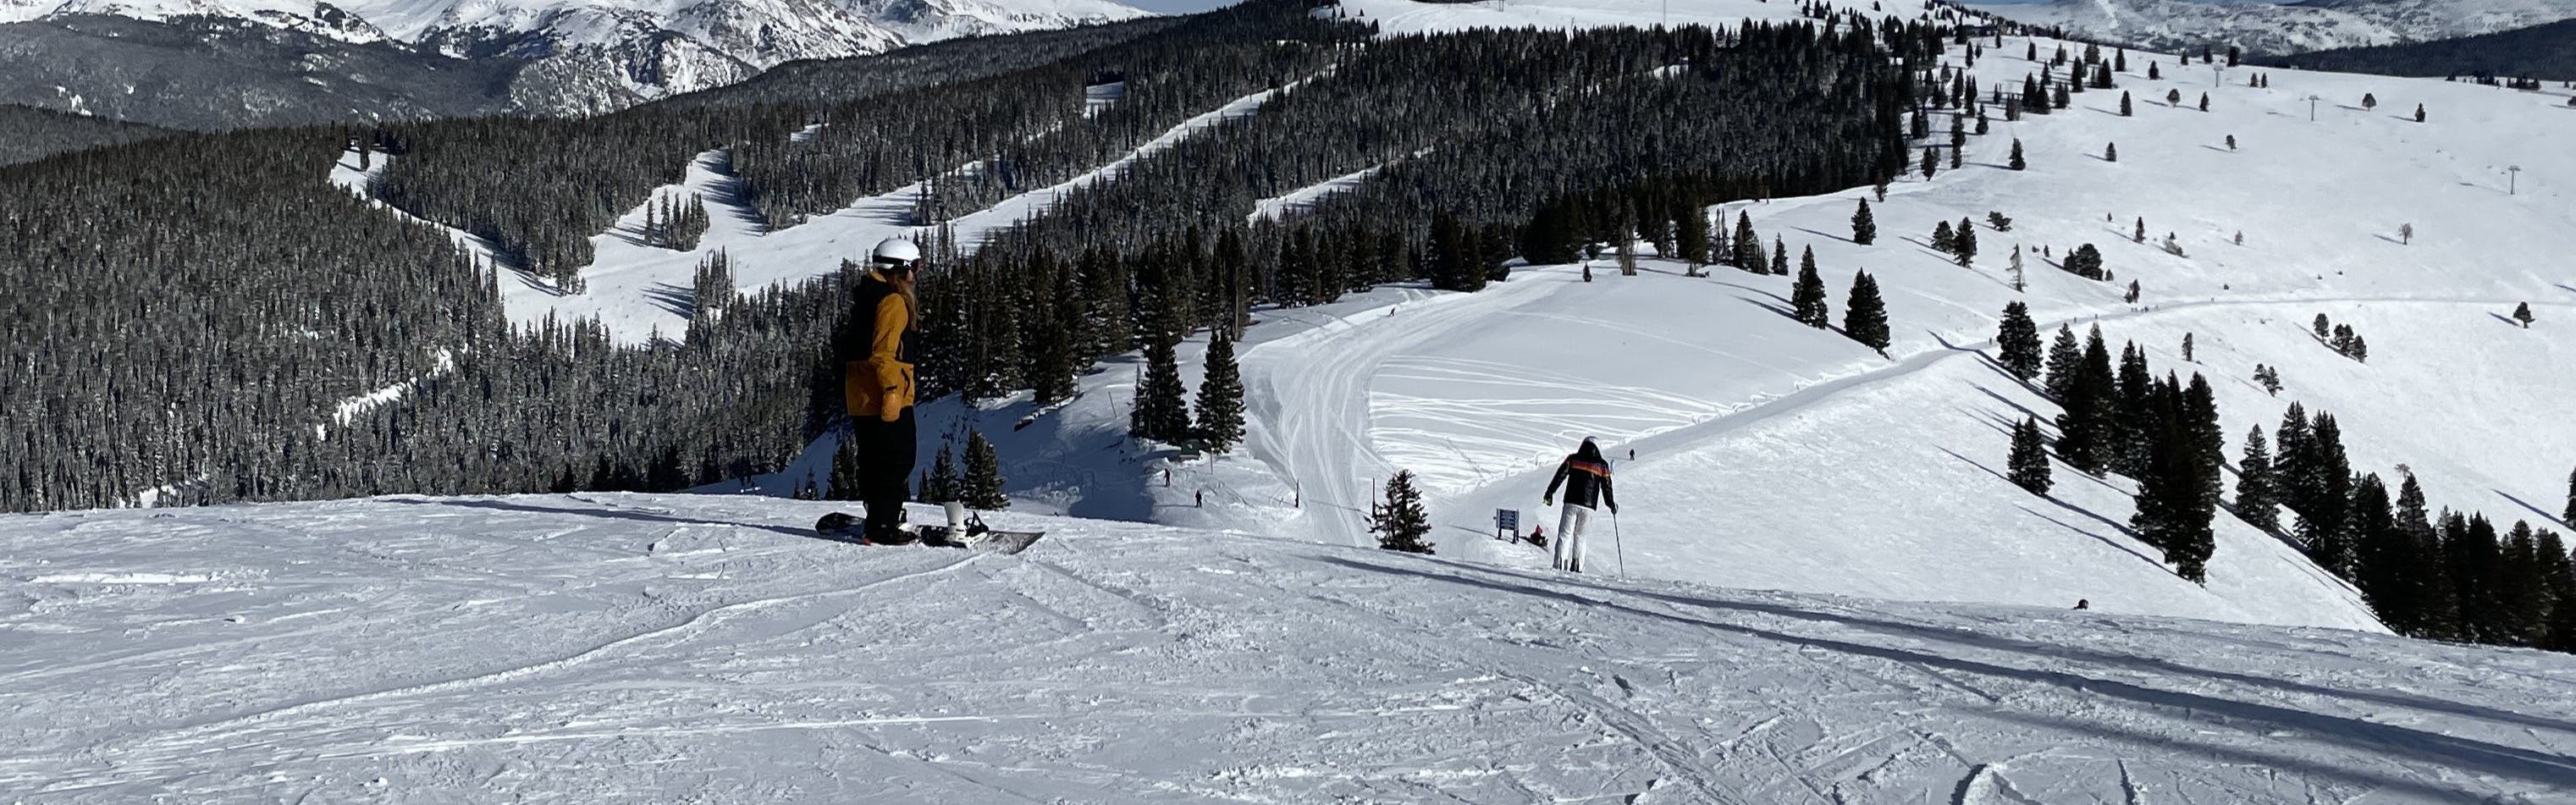 A snowboarder prepared to snowboard down a ski run. There are other skiers and snowboarders visible on the run. 